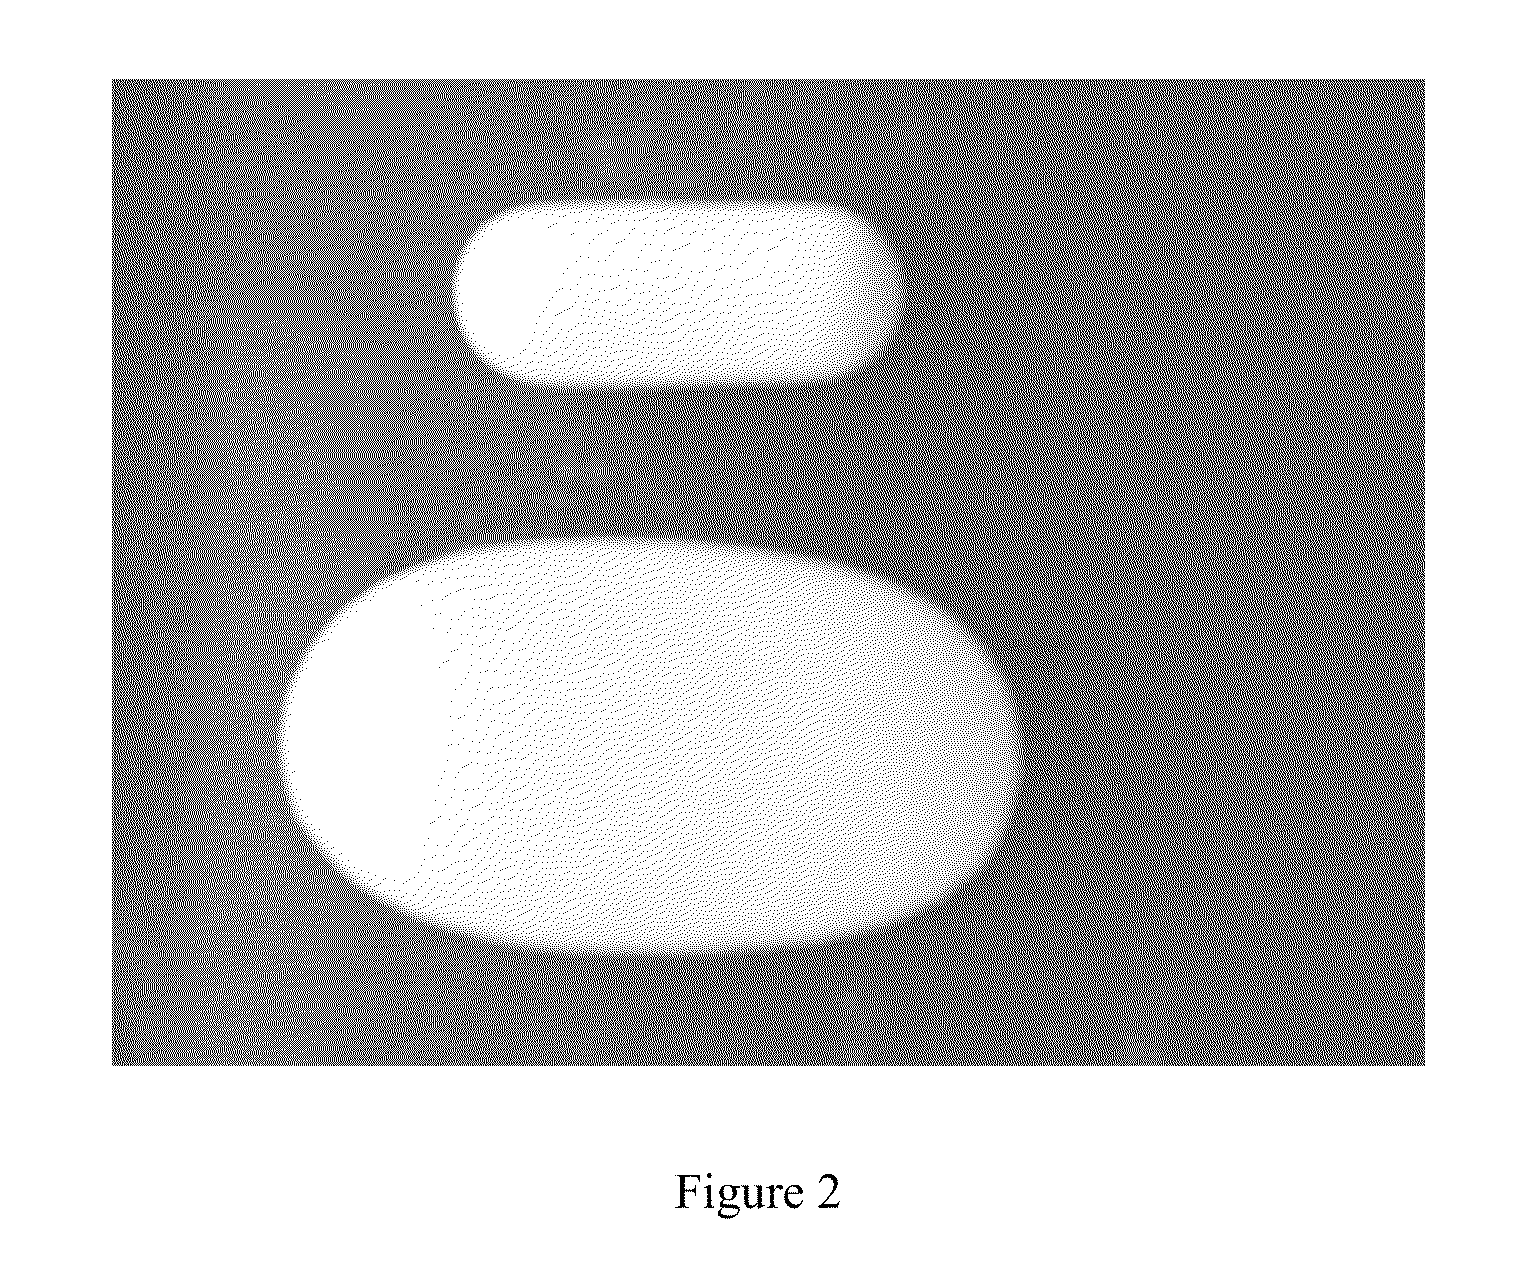 Method of treating a disease condition susceptible to baclofen therapy